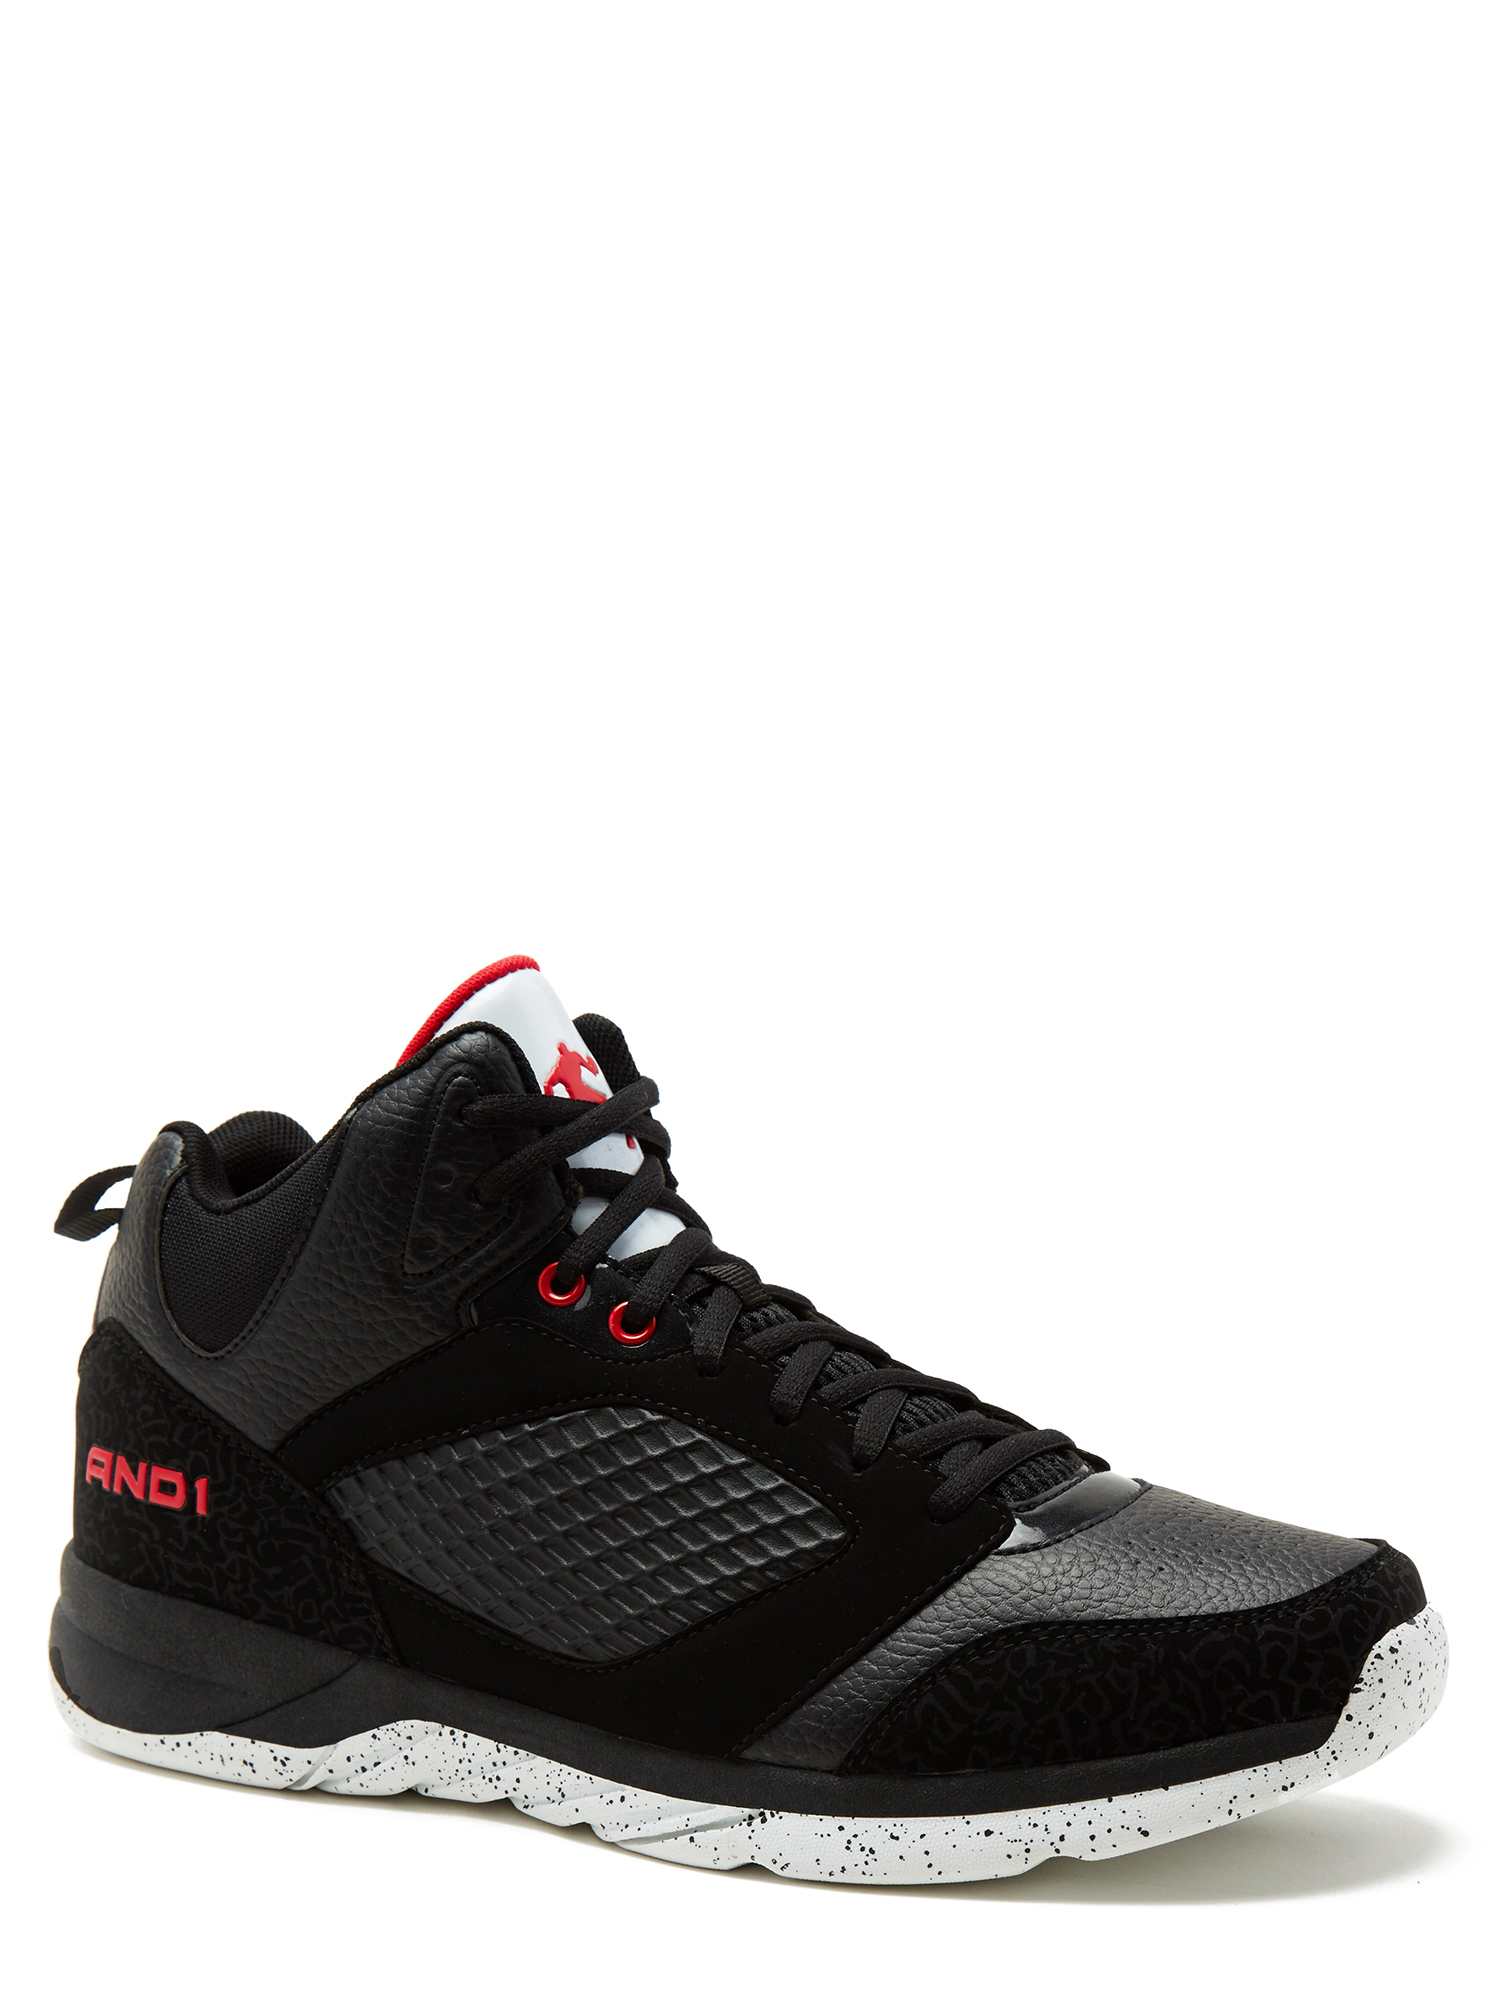 AND1 Men's Capital 2.0 Athletic Shoe - image 1 of 5